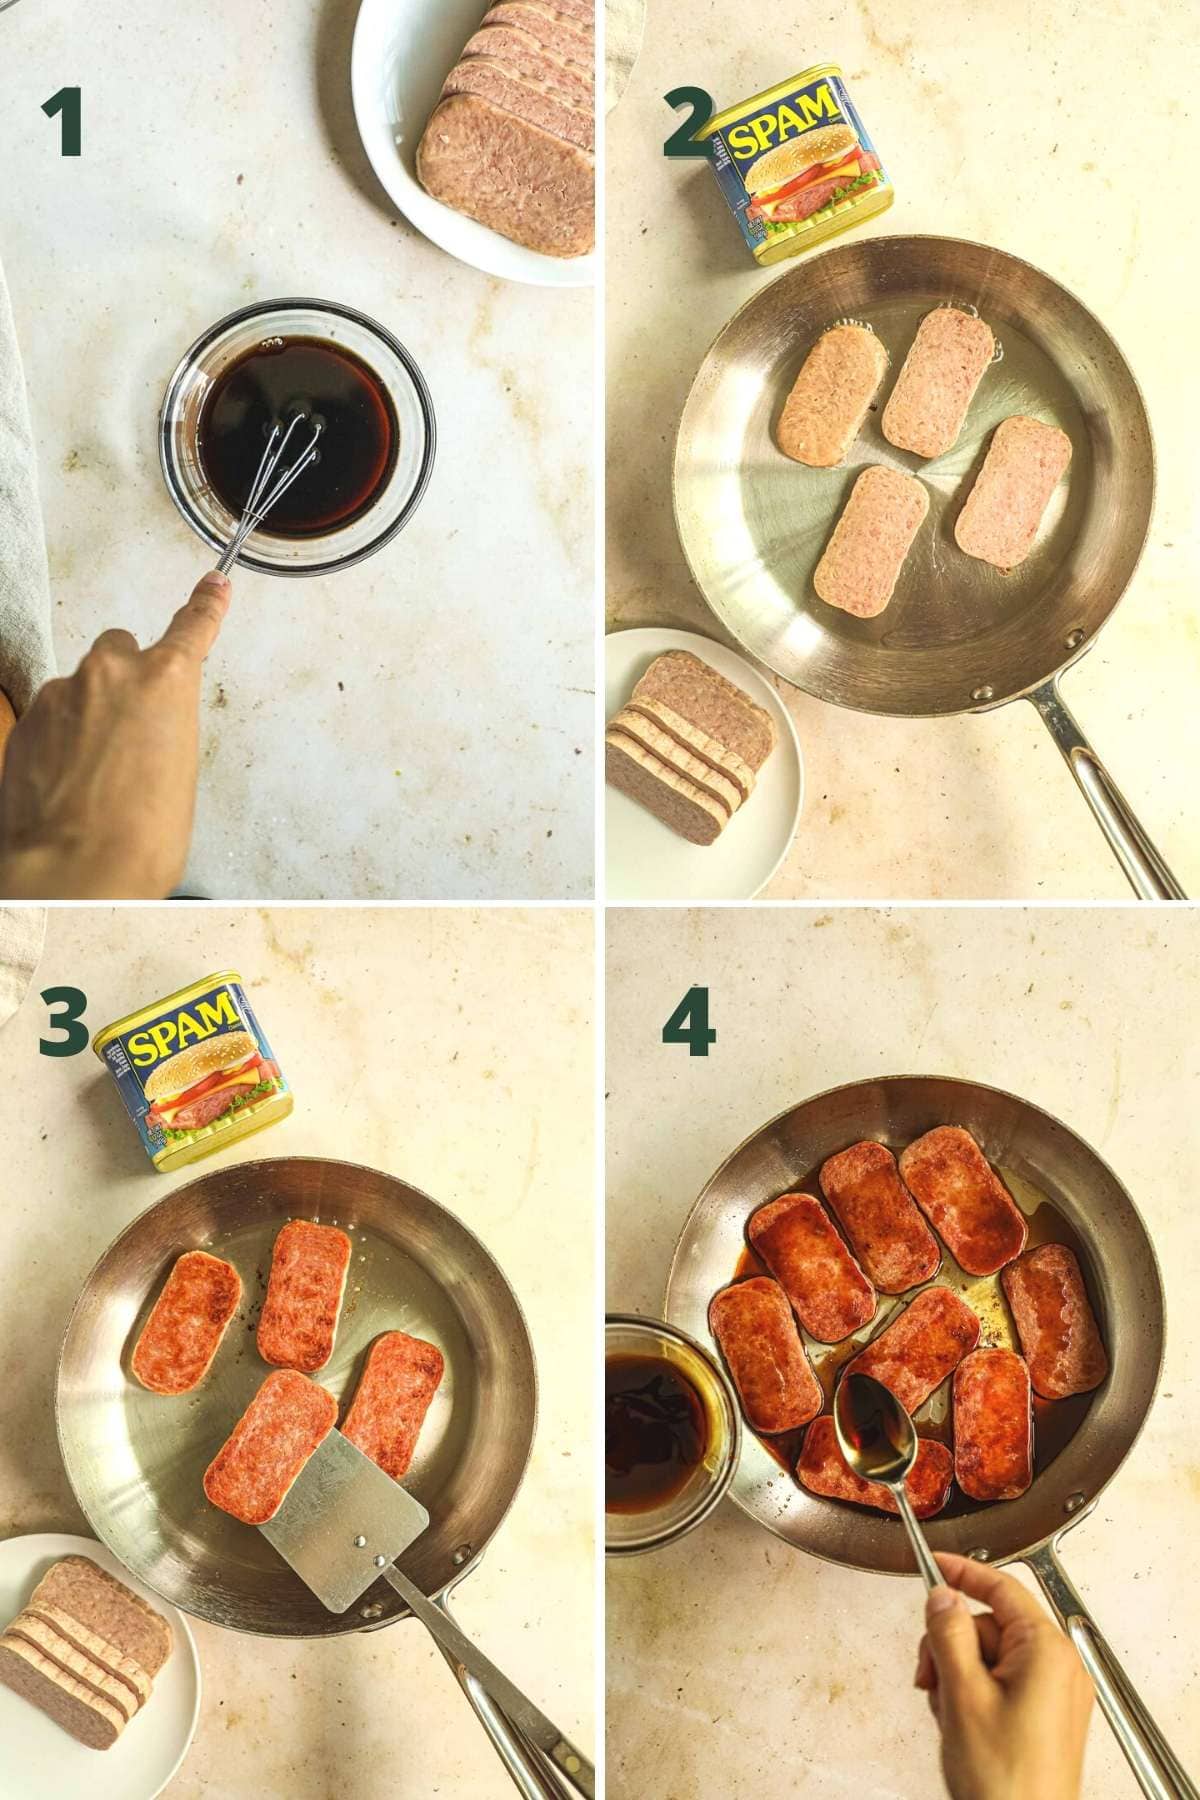 Steps to make pan fried Spam, including making the teriyaki sauce, pan frying the Spam on both sides, and simmer it in homemade teriyaki sauce.